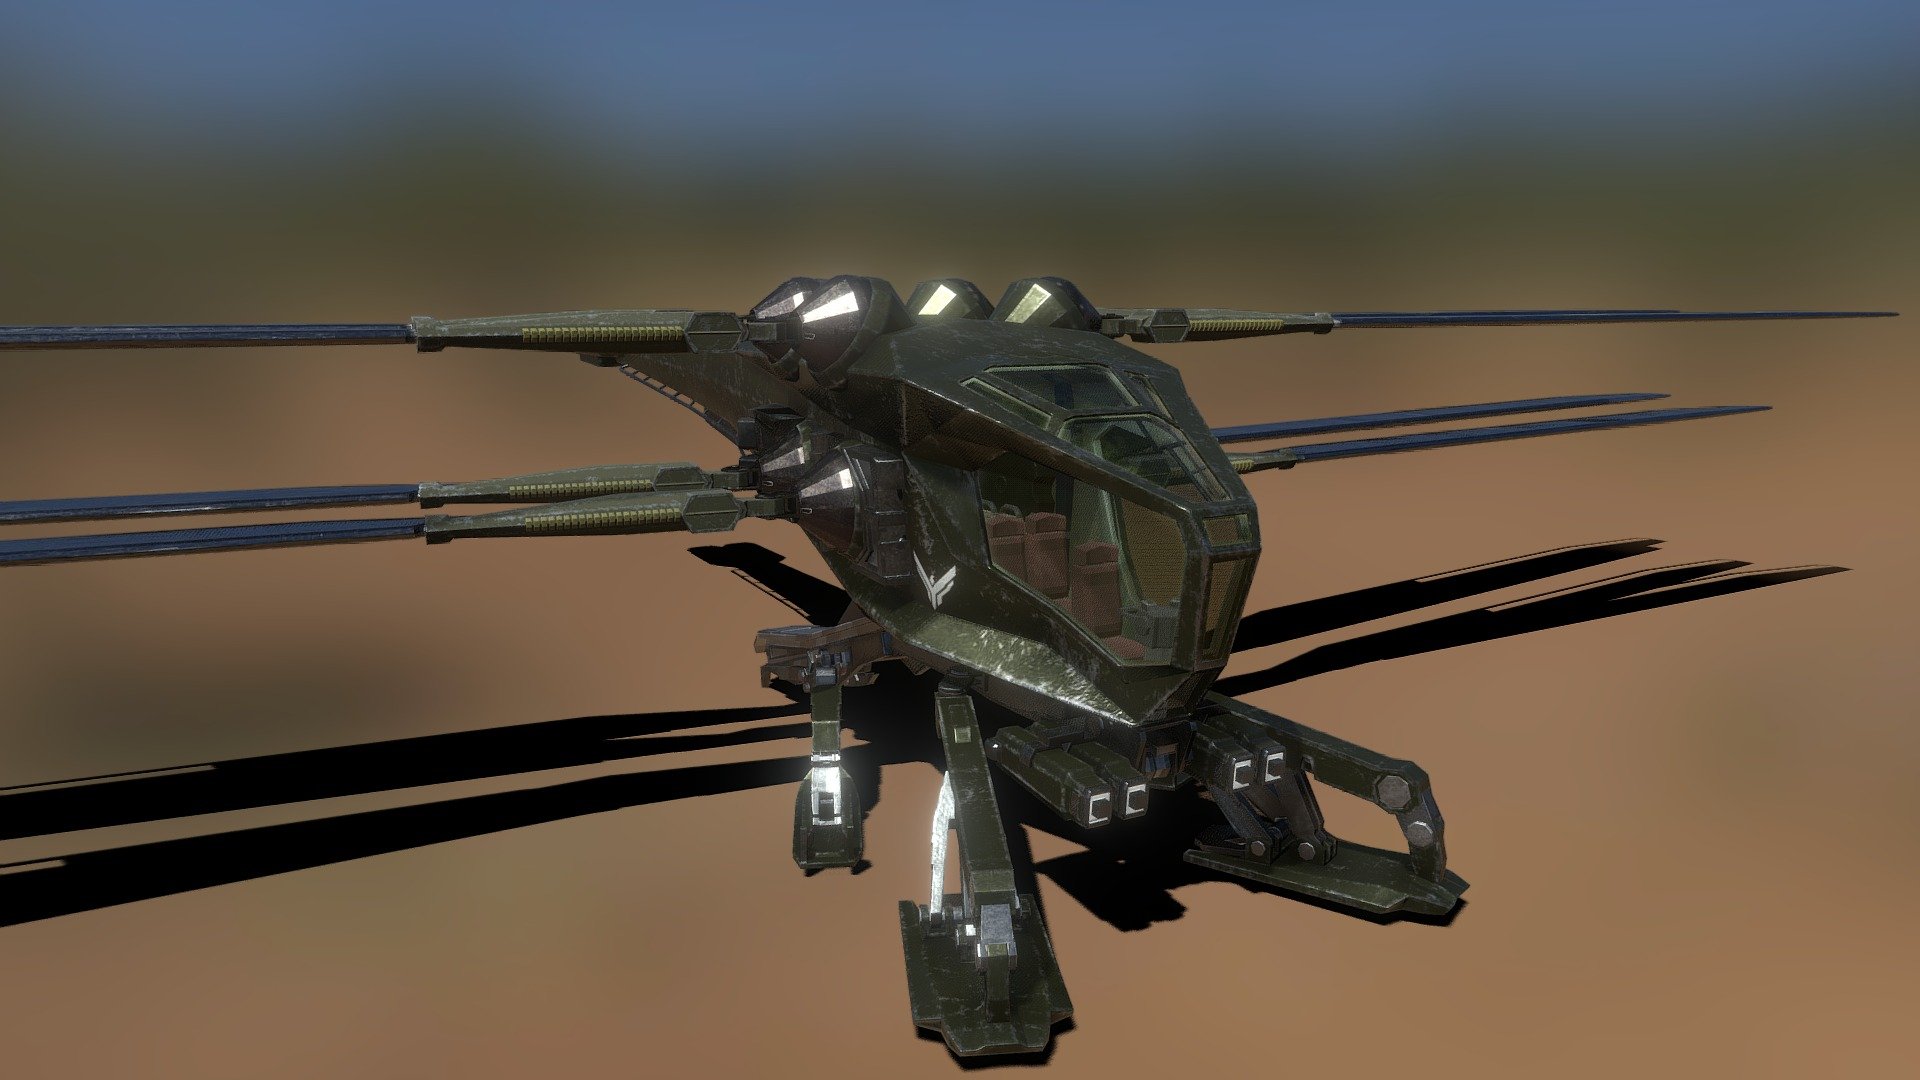 Ornithopter from the 2021 movie adaptation of the book dune - Atreides Ornithopter - 3D model by narchl 3d model